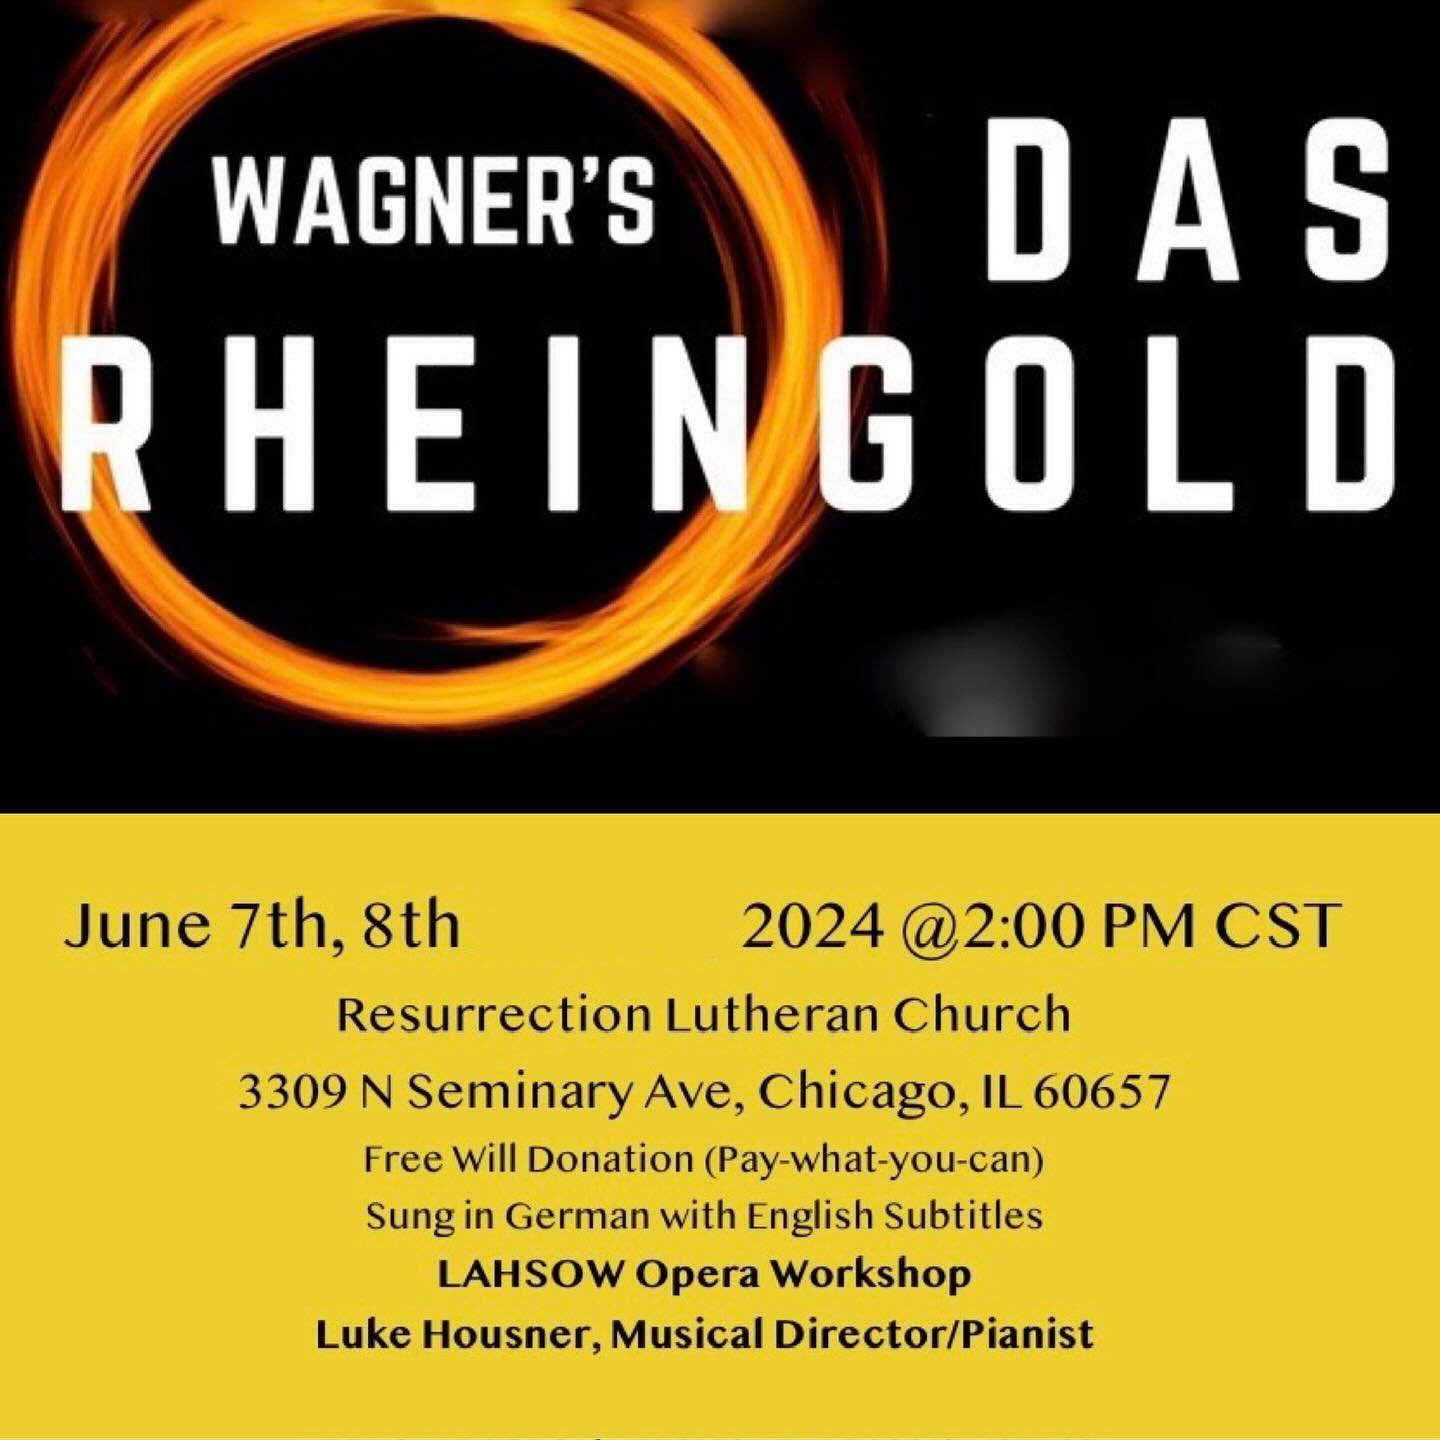 Chicago save the dates!!! I would recommend the Saturday performance, as I am singing a larger role. 

Fricka / Saturday June 8 @ 2pm
Erda / Friday June 7 @ 2pm

Join us for a semi-staged version.
June 7th and 8th 2024 @ 2:00 PM CST

Lakeview/Wrigley